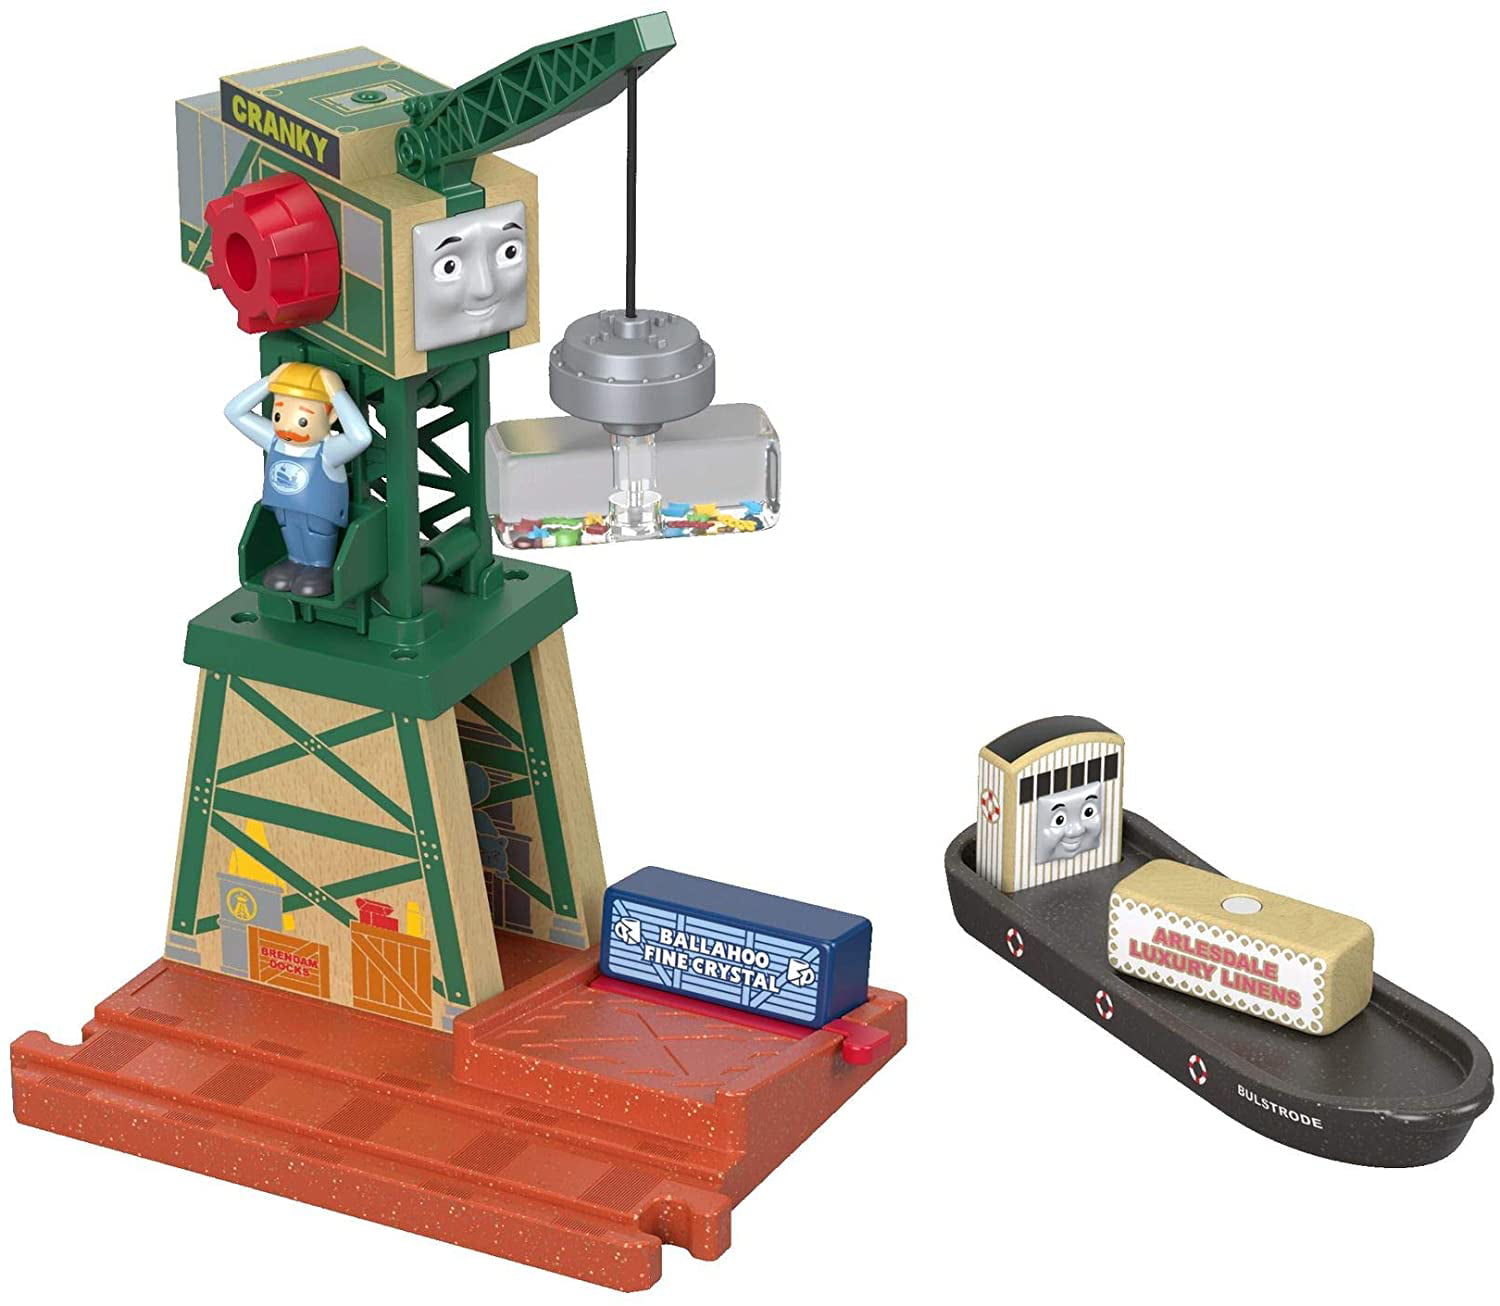 Fisher-Price Thomas & Friends Cranky The Crane Train Playset For Preschool Kids Ages 3 Years And Older